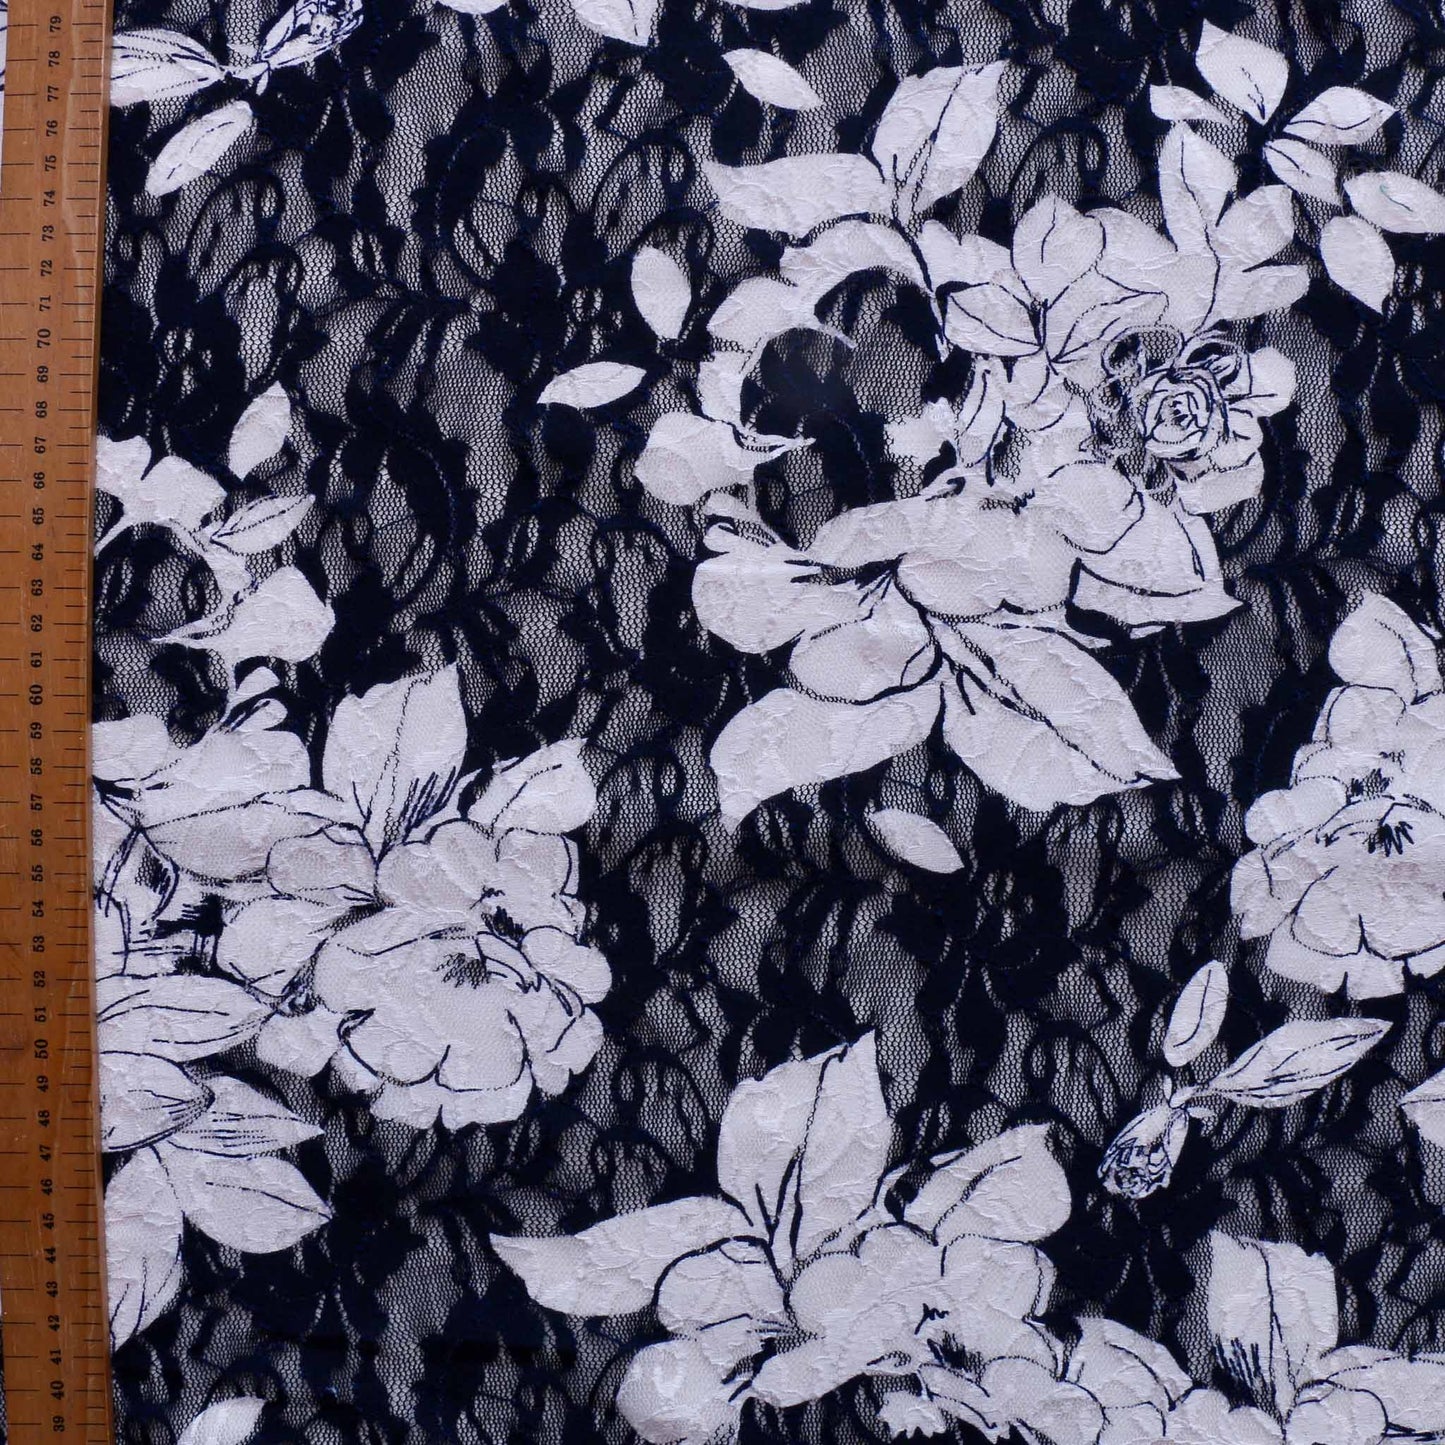 metre navy and white floral dressmaking lace fabric with large white flowers on delicate pattern